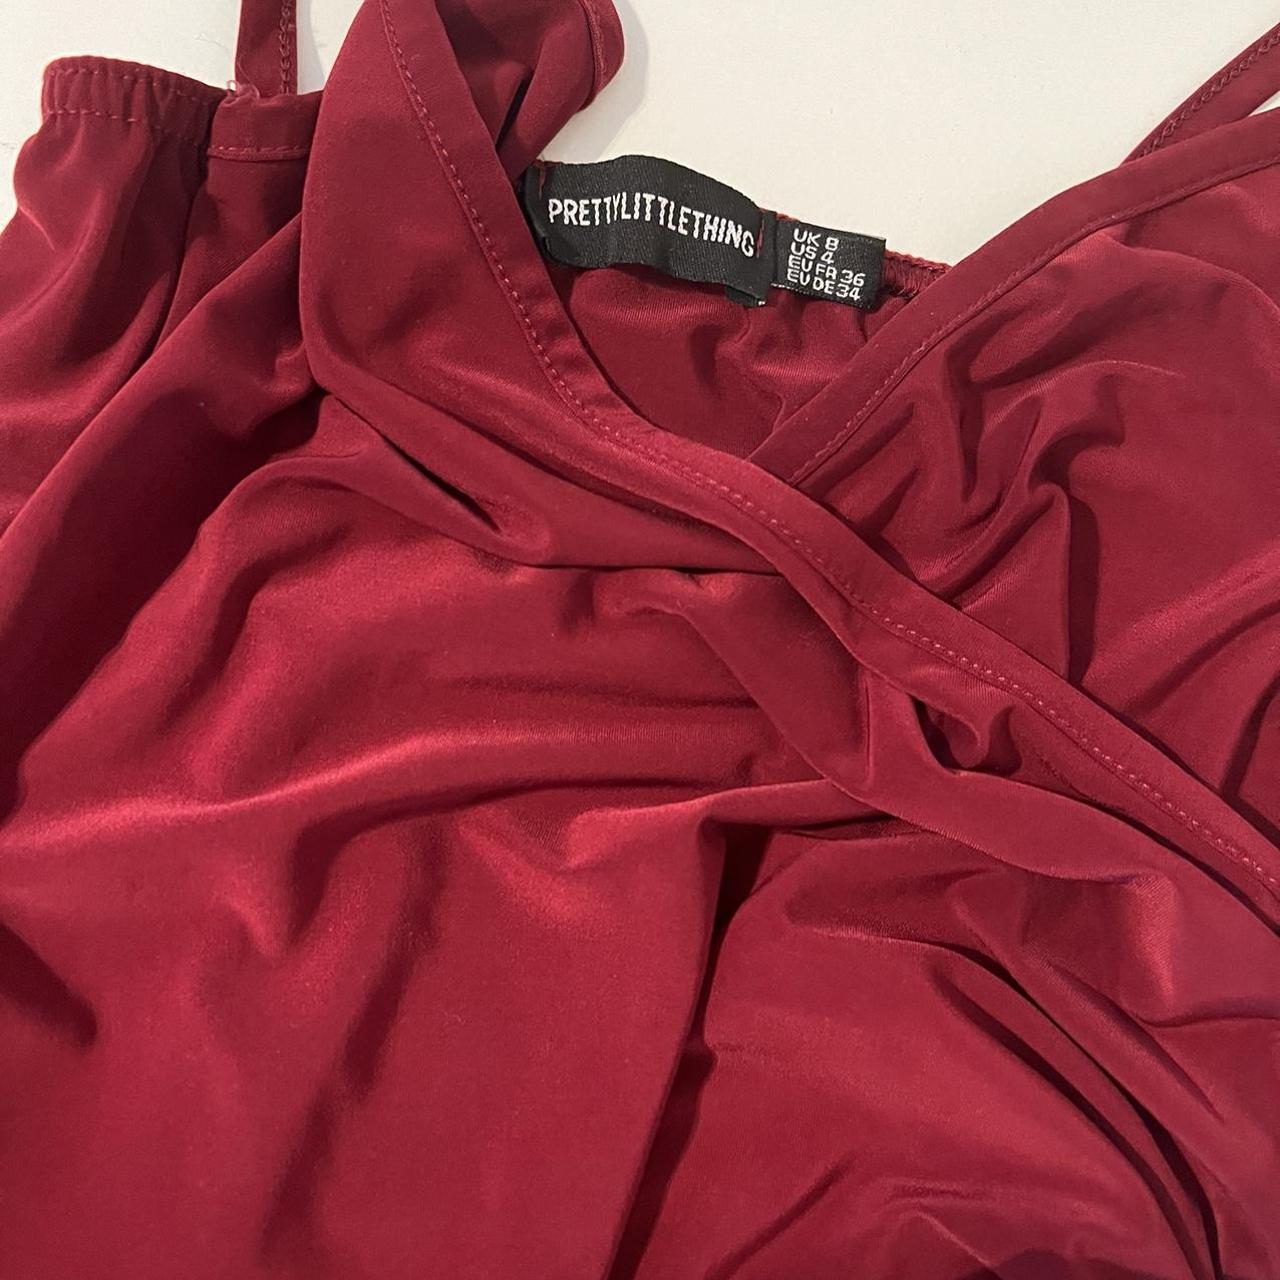 pretty little thing “Shape Burgundy Ruched Side... - Depop